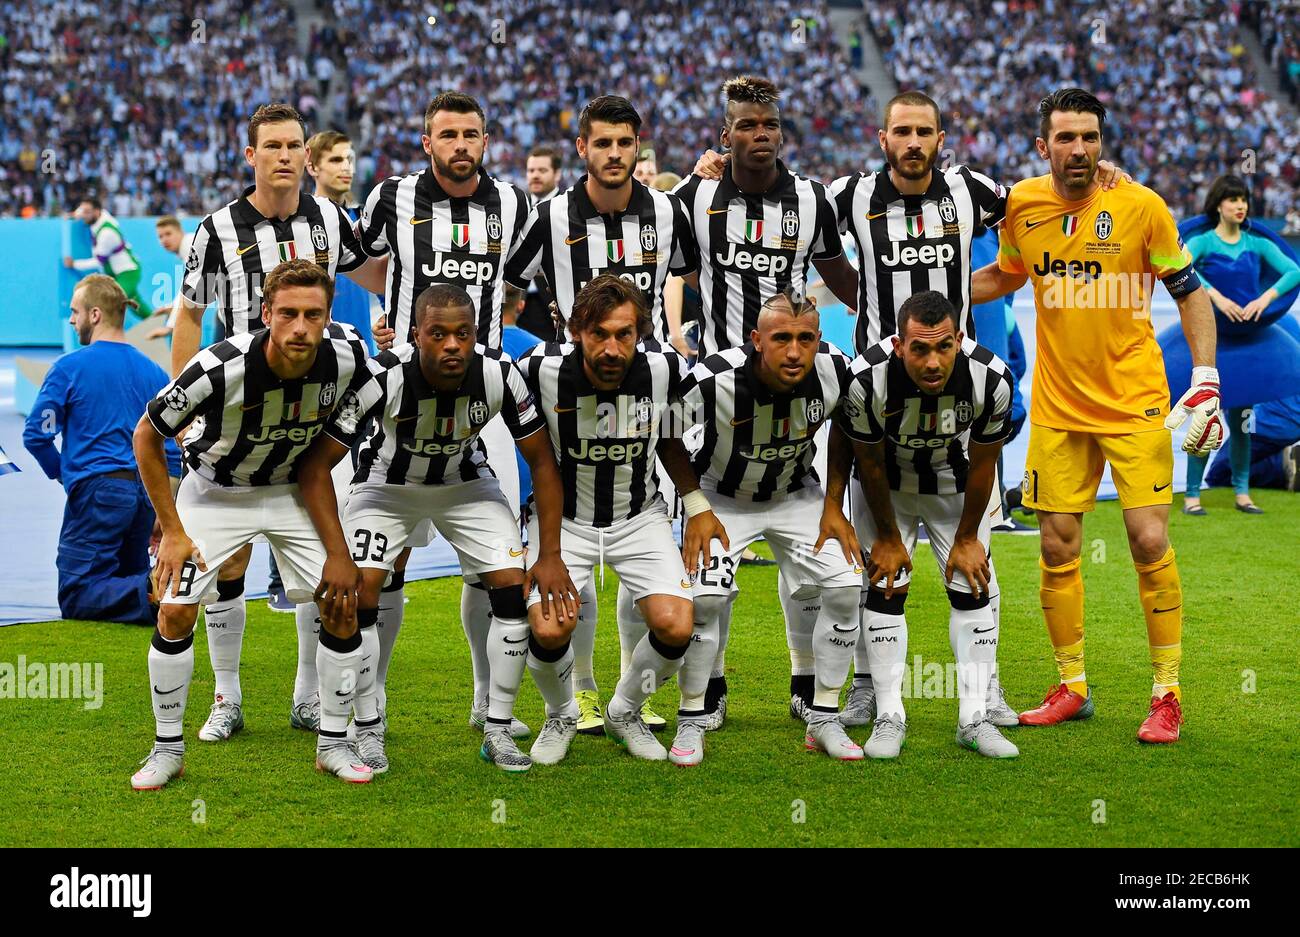 Football - FC Barcelona v Juventus - UEFA Champions League Final -  Olympiastadion, Berlin, Germany - 6/6/15 Juventus team group before the  match Reuters / Dylan Martinez Stock Photo - Alamy